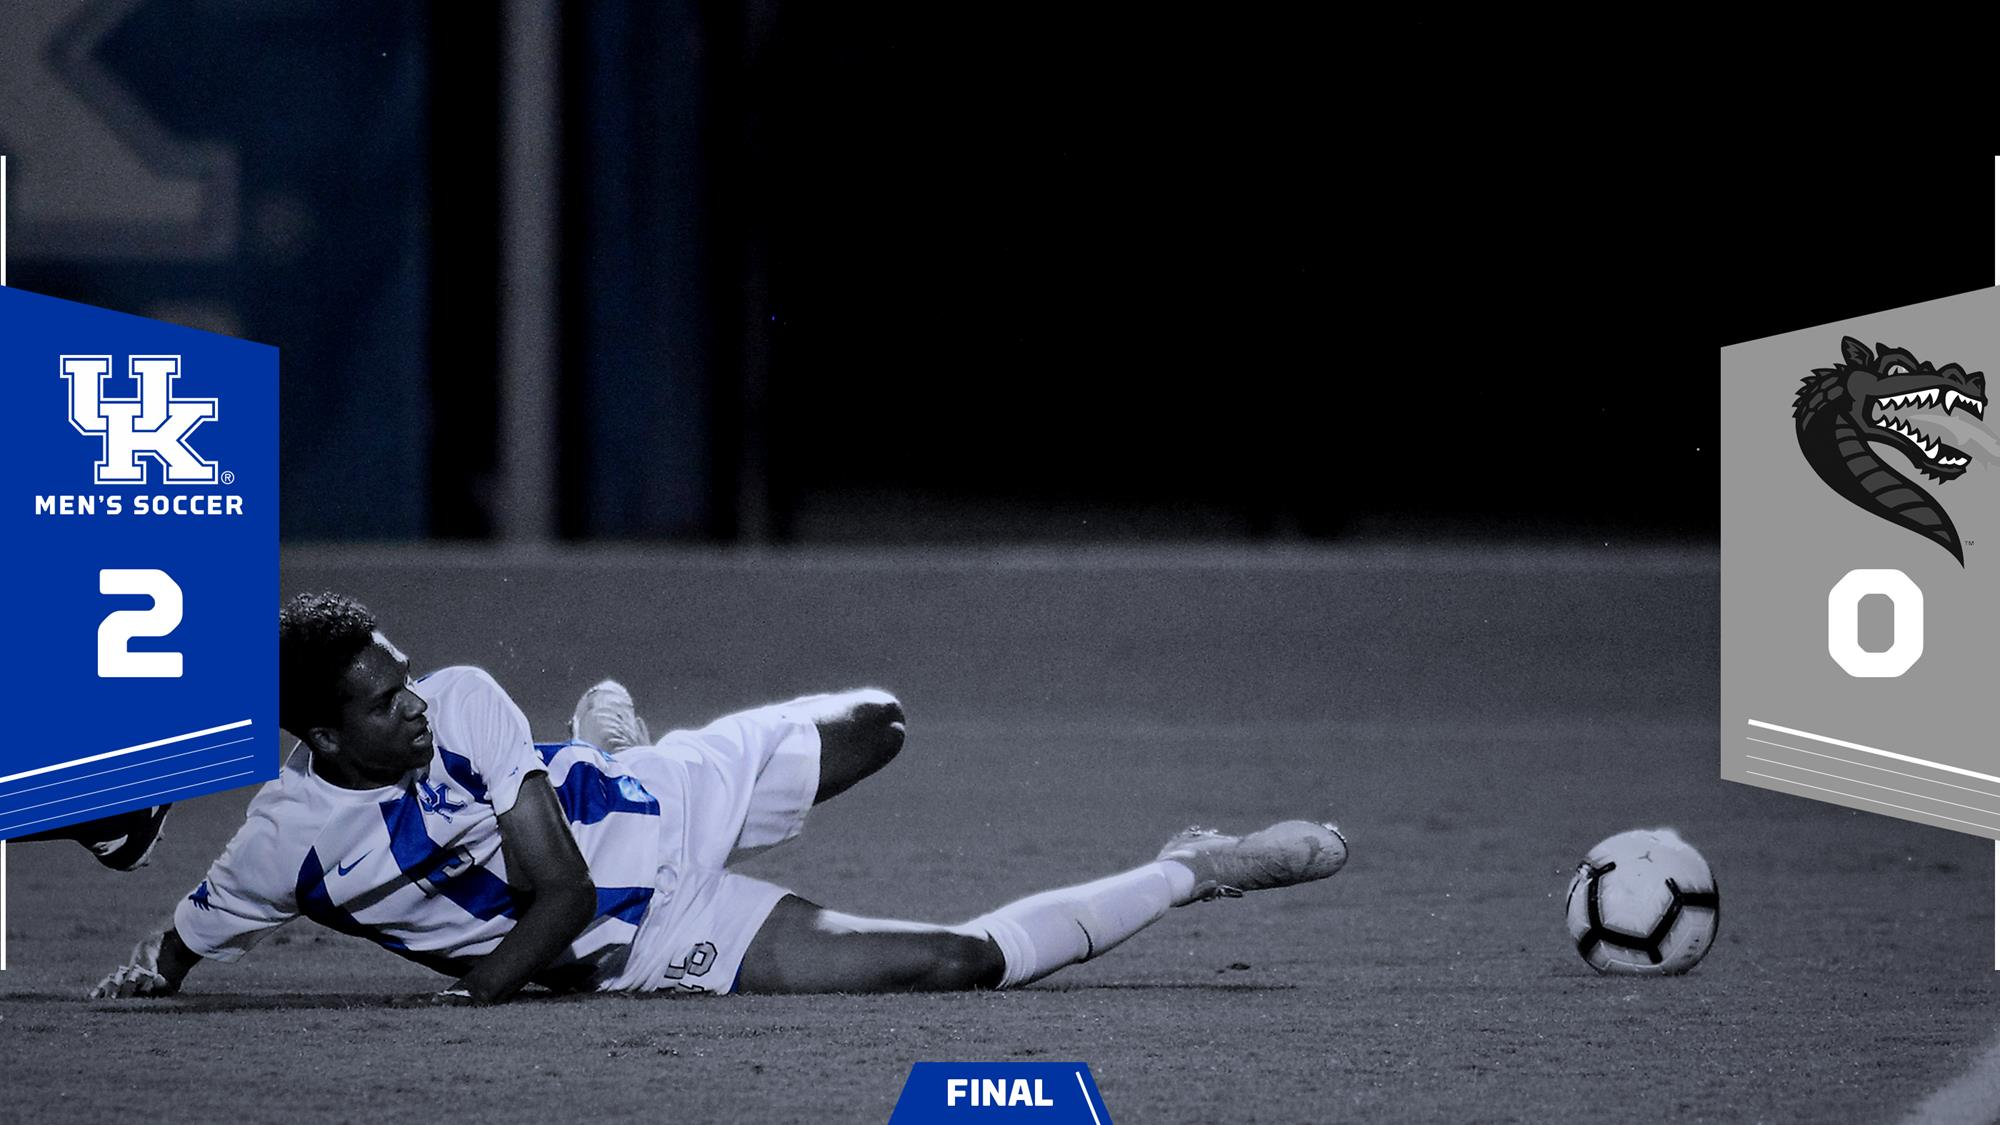 Williams, Lindow Goals Give UK 2-0 Win in Conference Opener